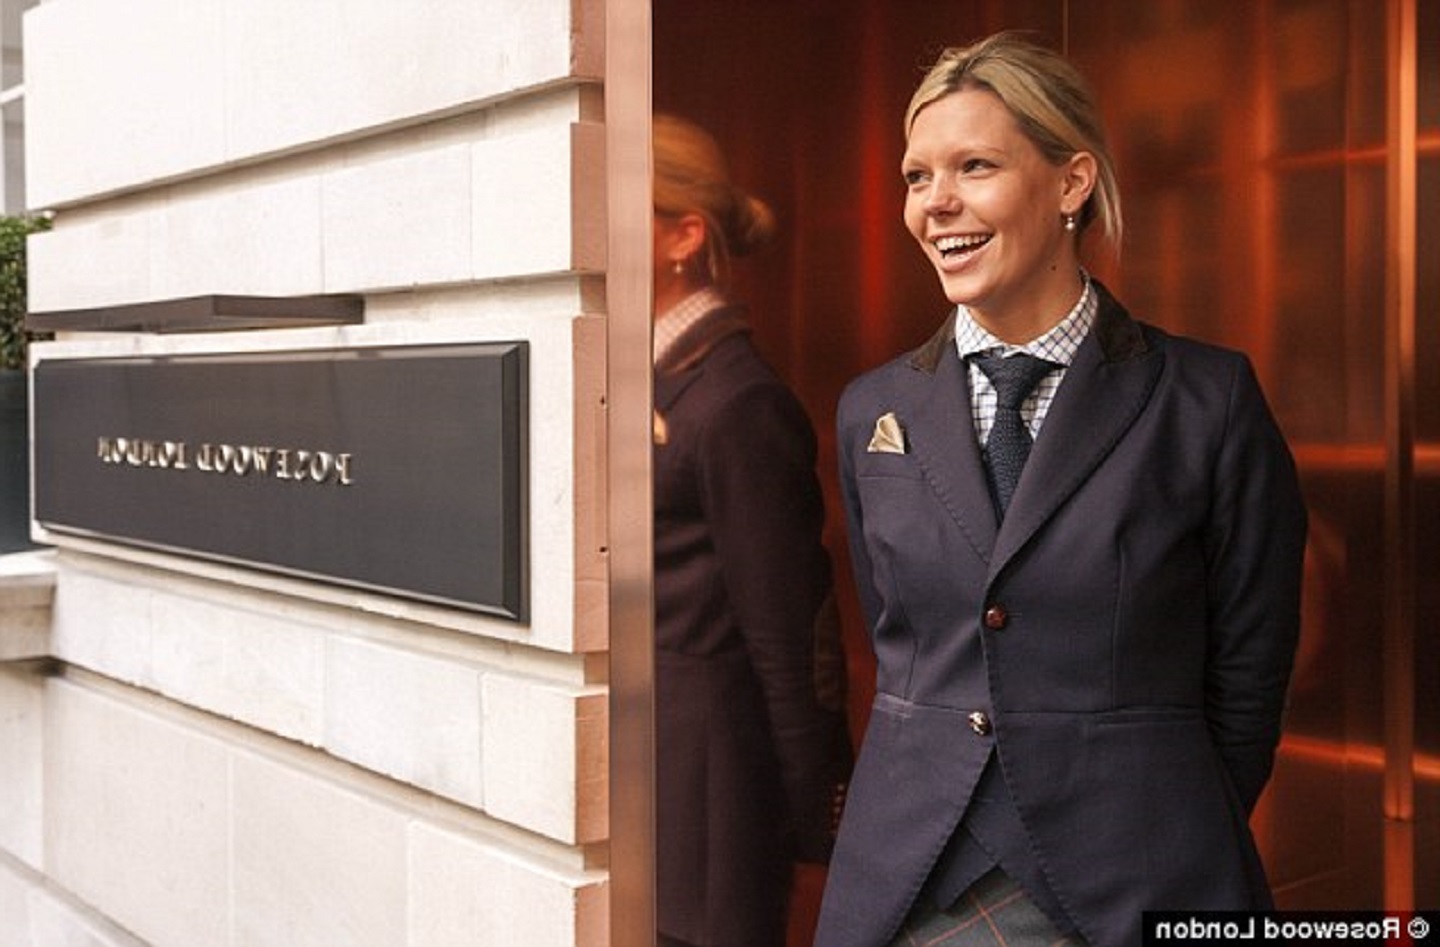 The fashion world conquers hotels by designing staff uniforms